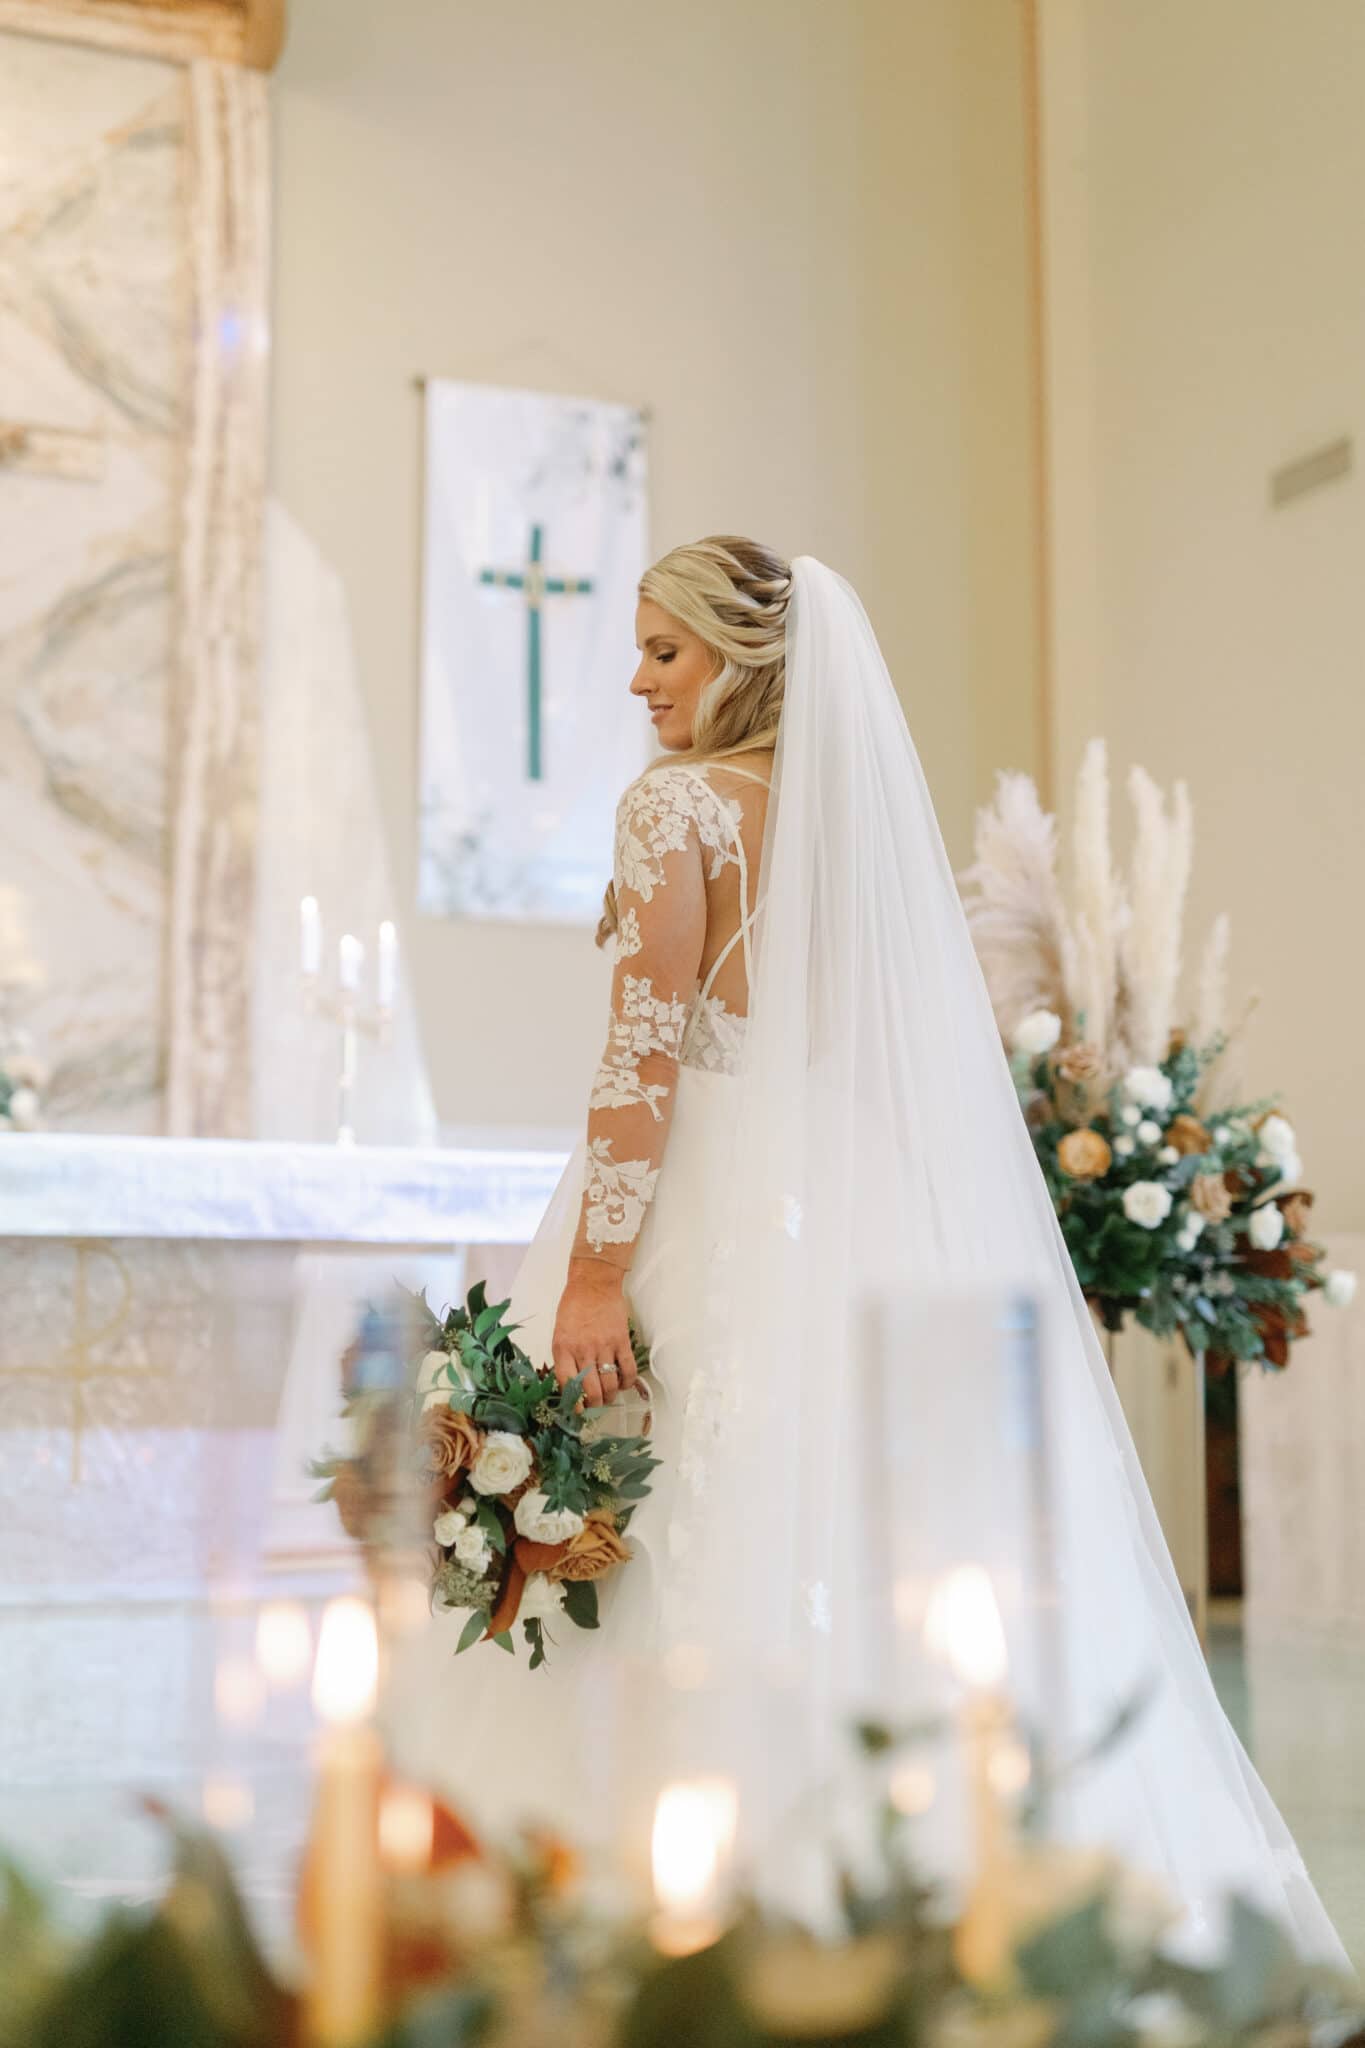 Bride poses with her bouquet in chapel